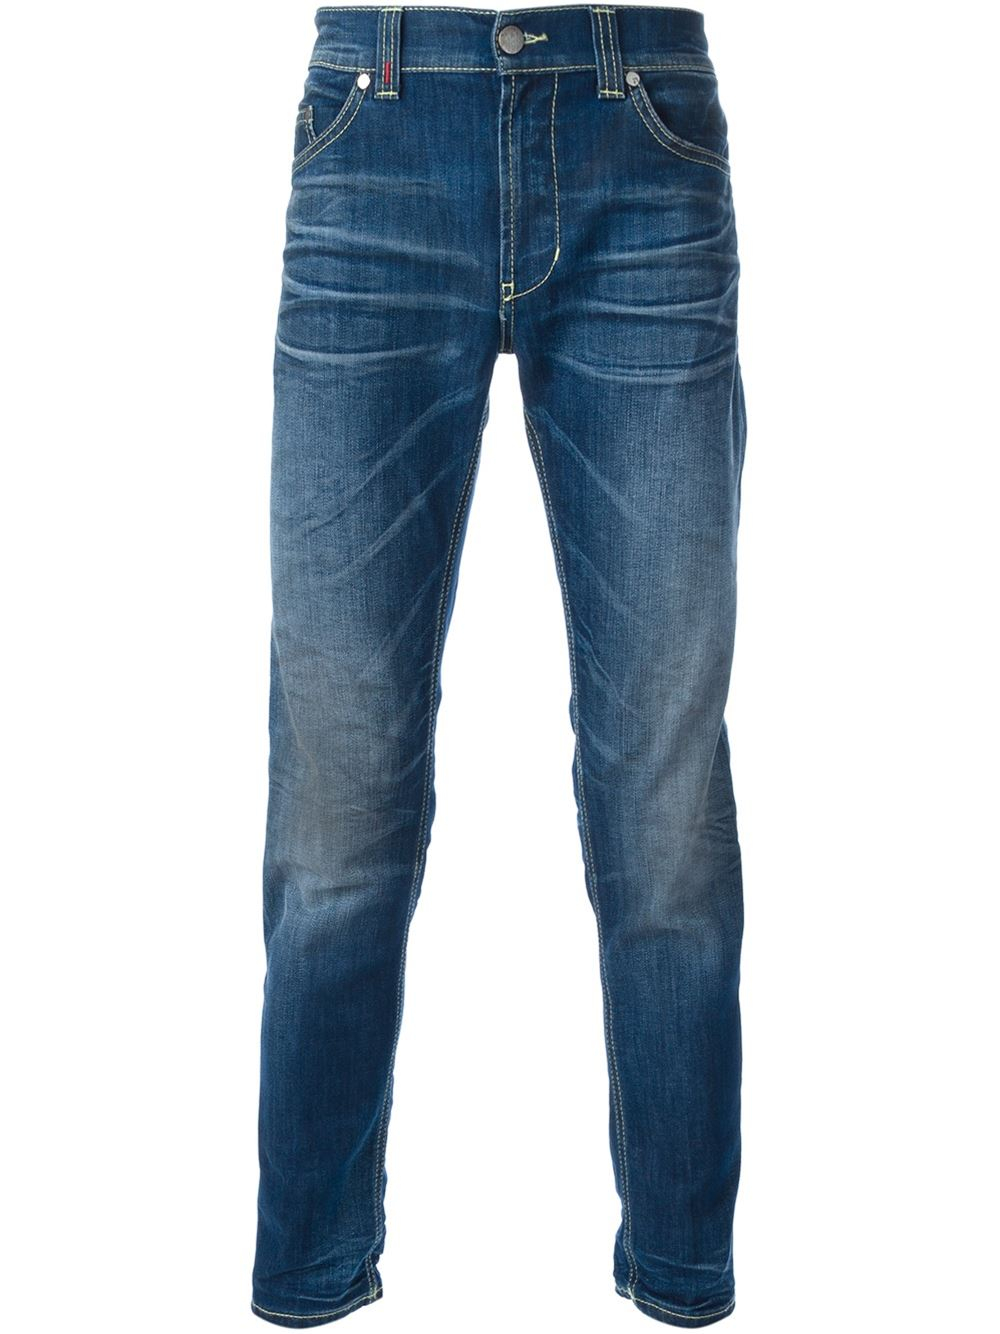 Lyst - Dondup Stone Washed Jeans in Blue for Men